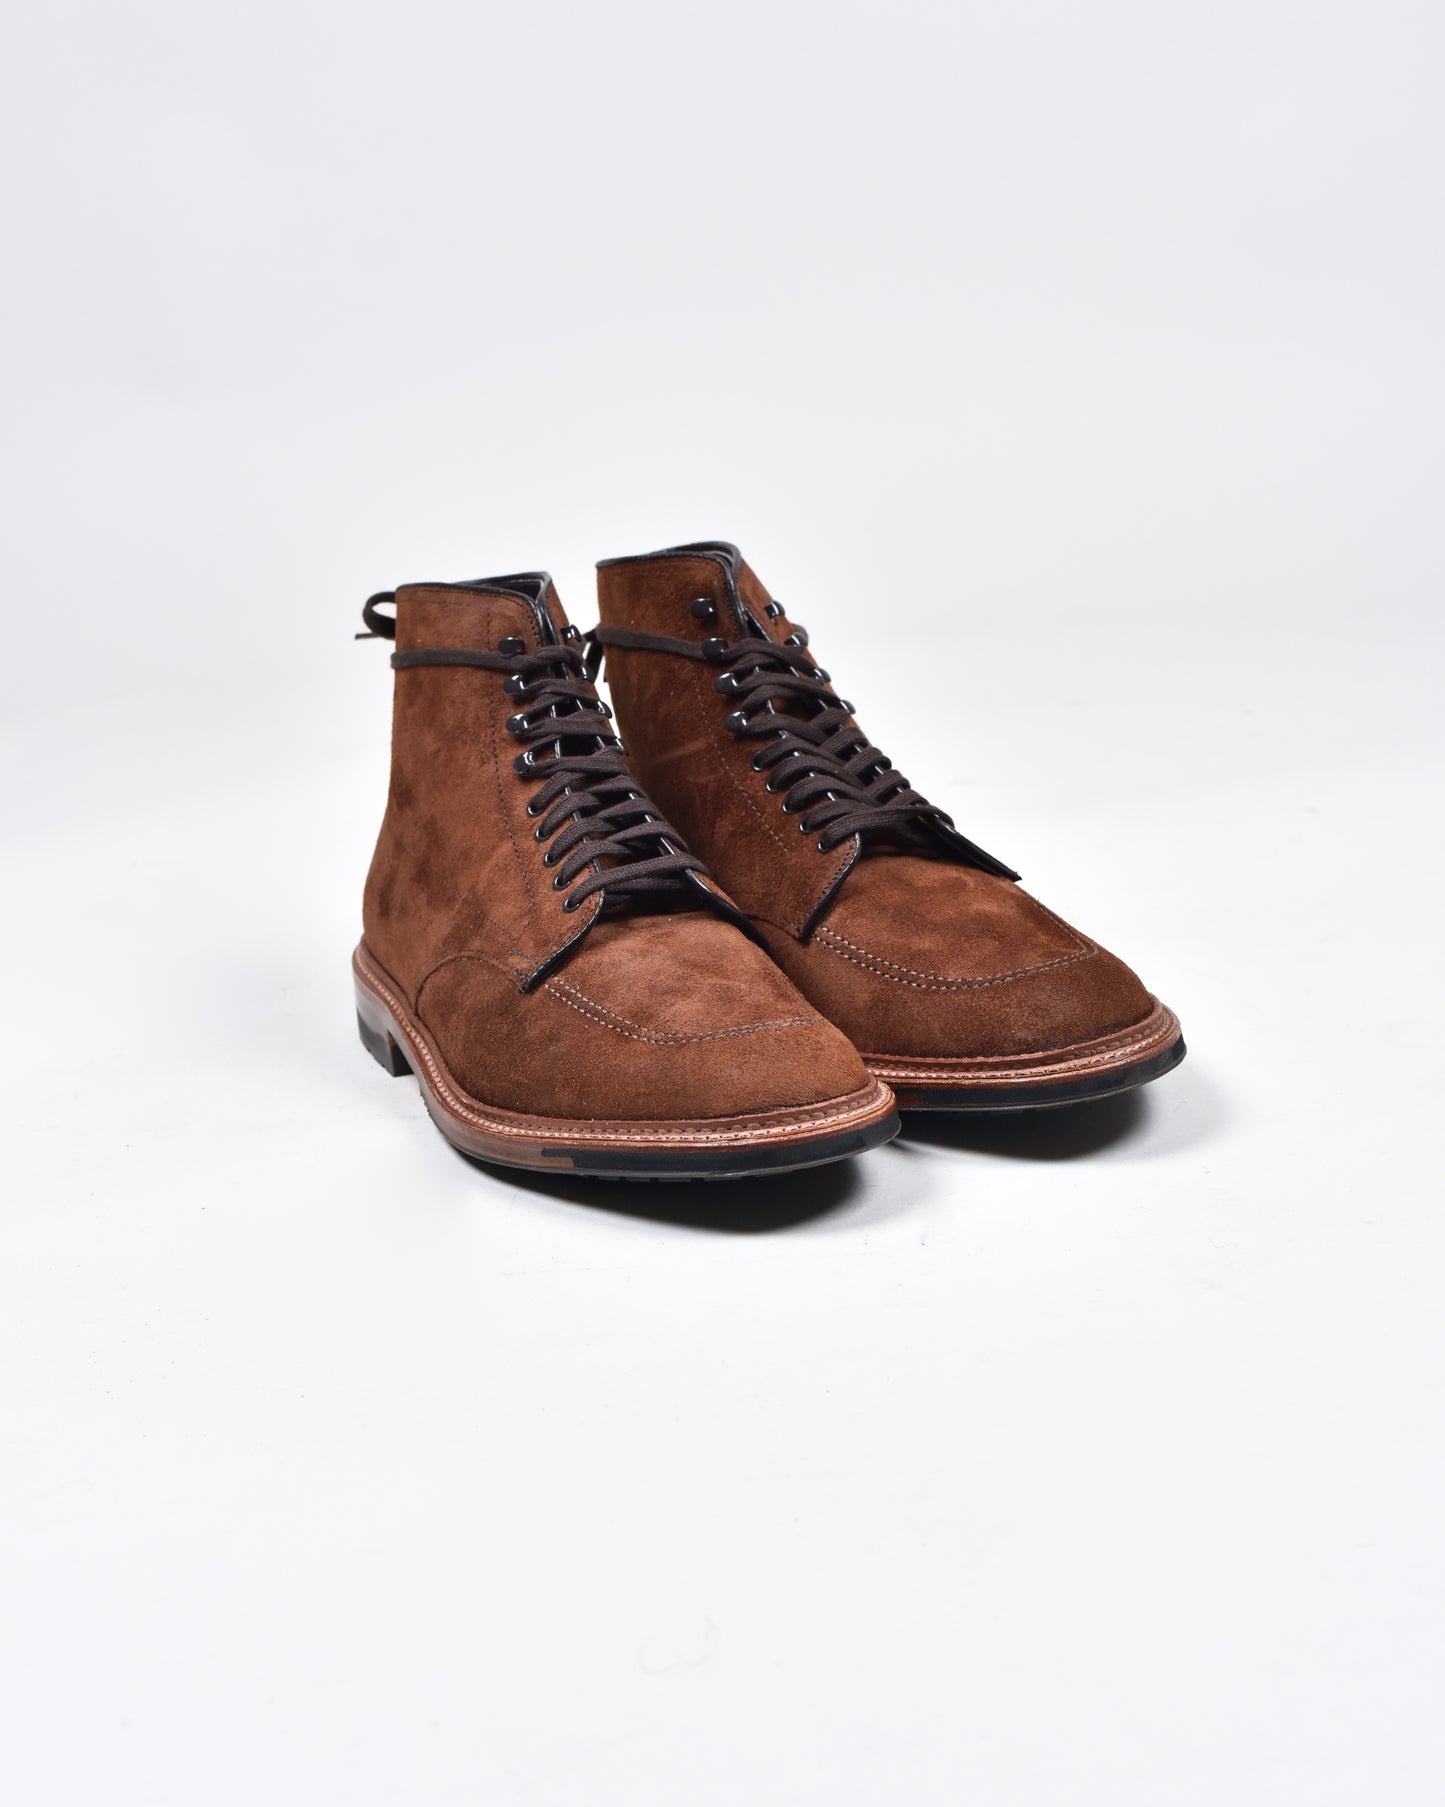 Alden - Mocc Toe Boot - Reverse Tobacco Chamois Suede